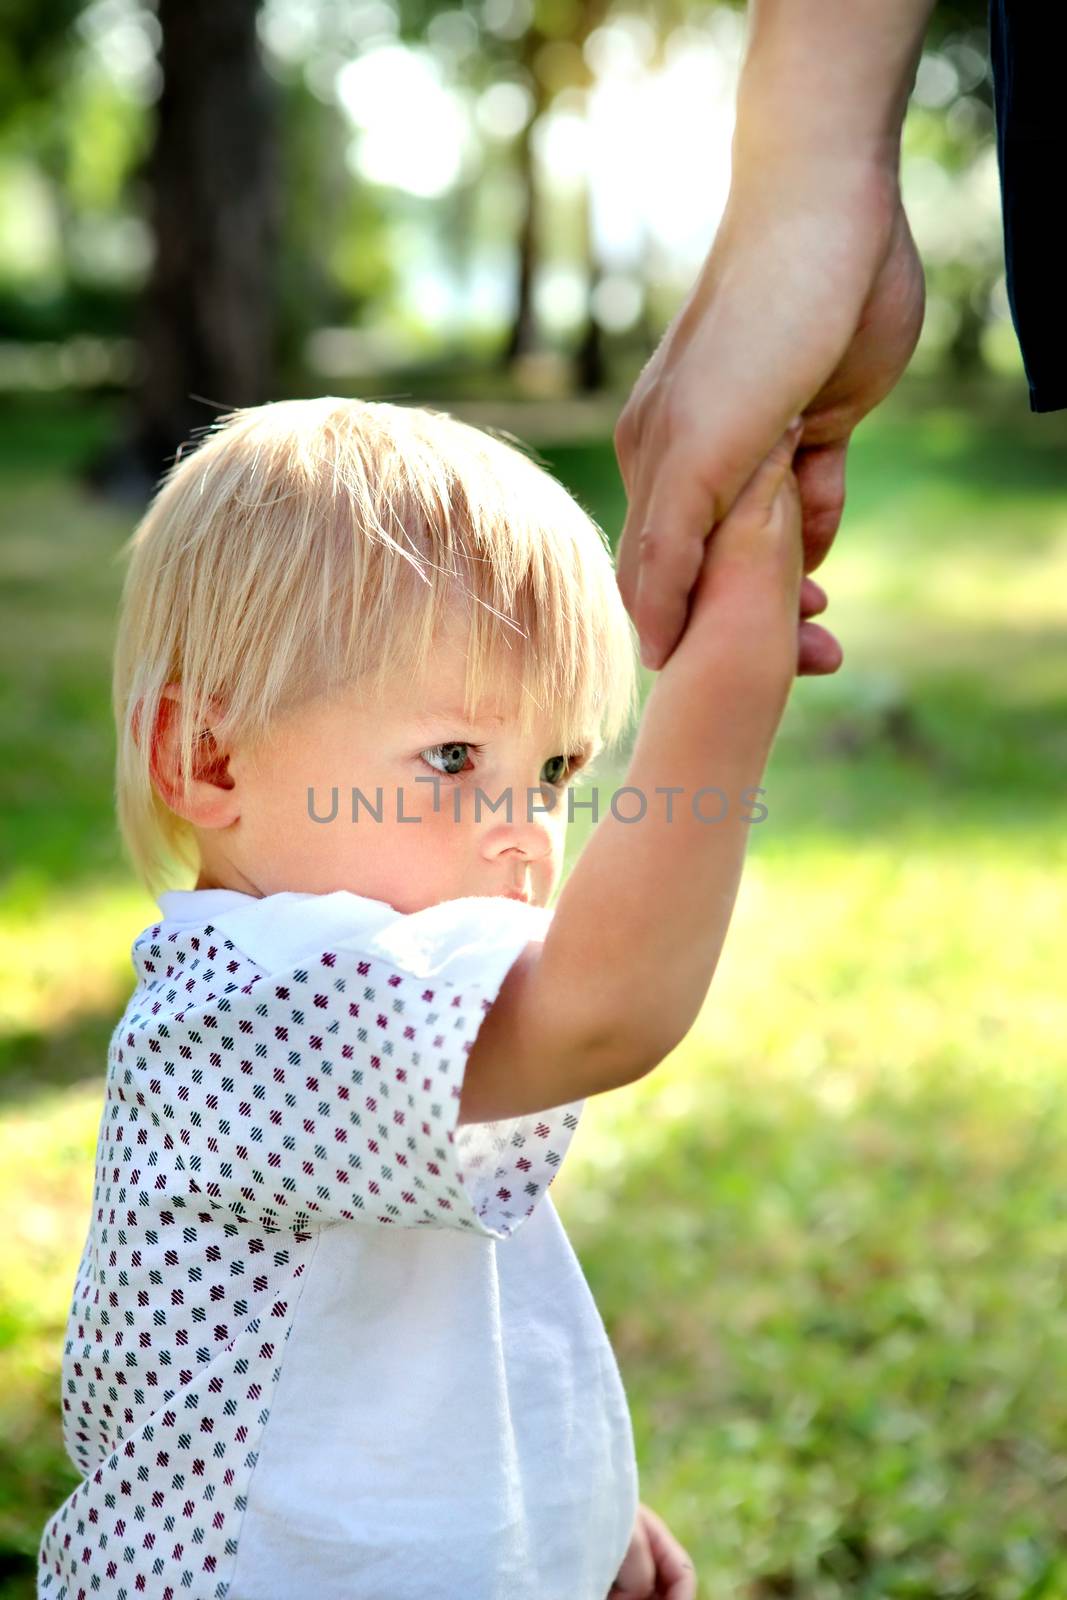 Sad Child hold the Parent Hand in the Summer Park